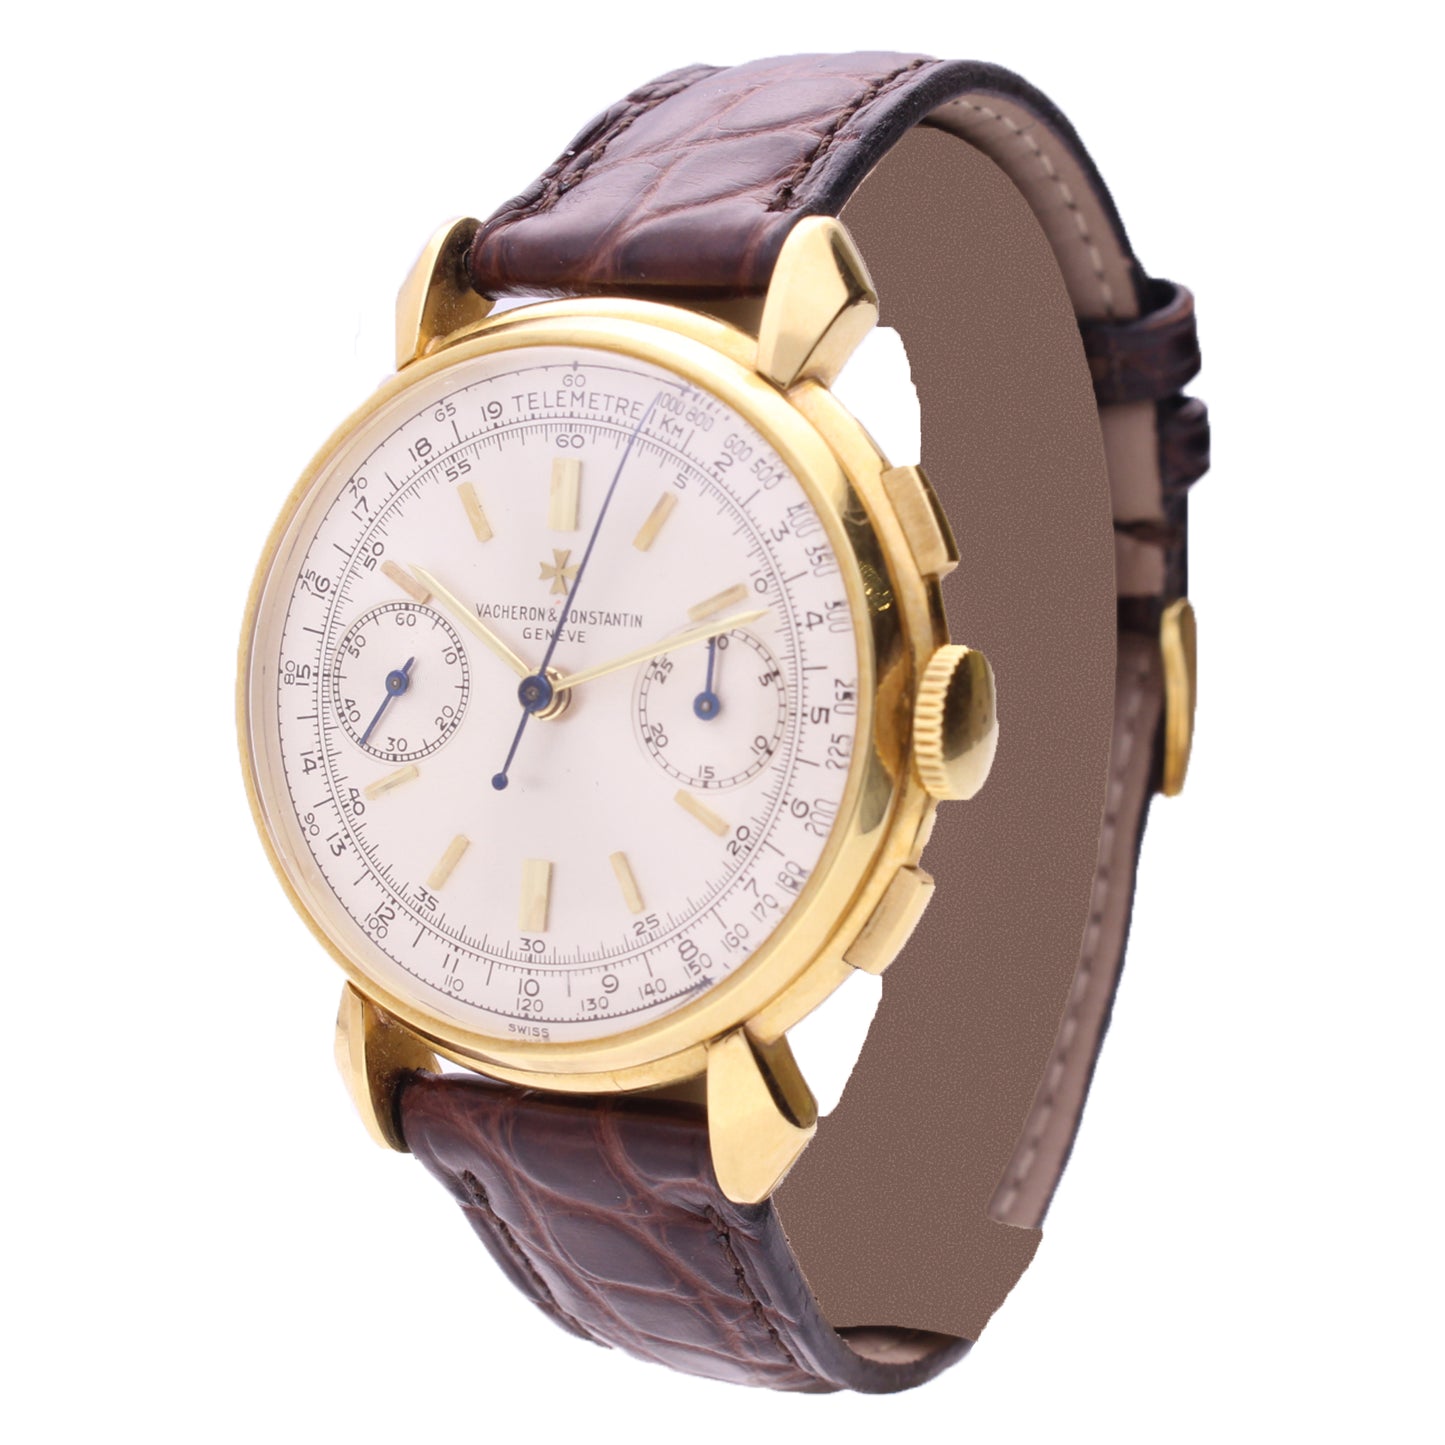 18ct yellow gold ref 4178 Chronograph wristwatch. Made 1950